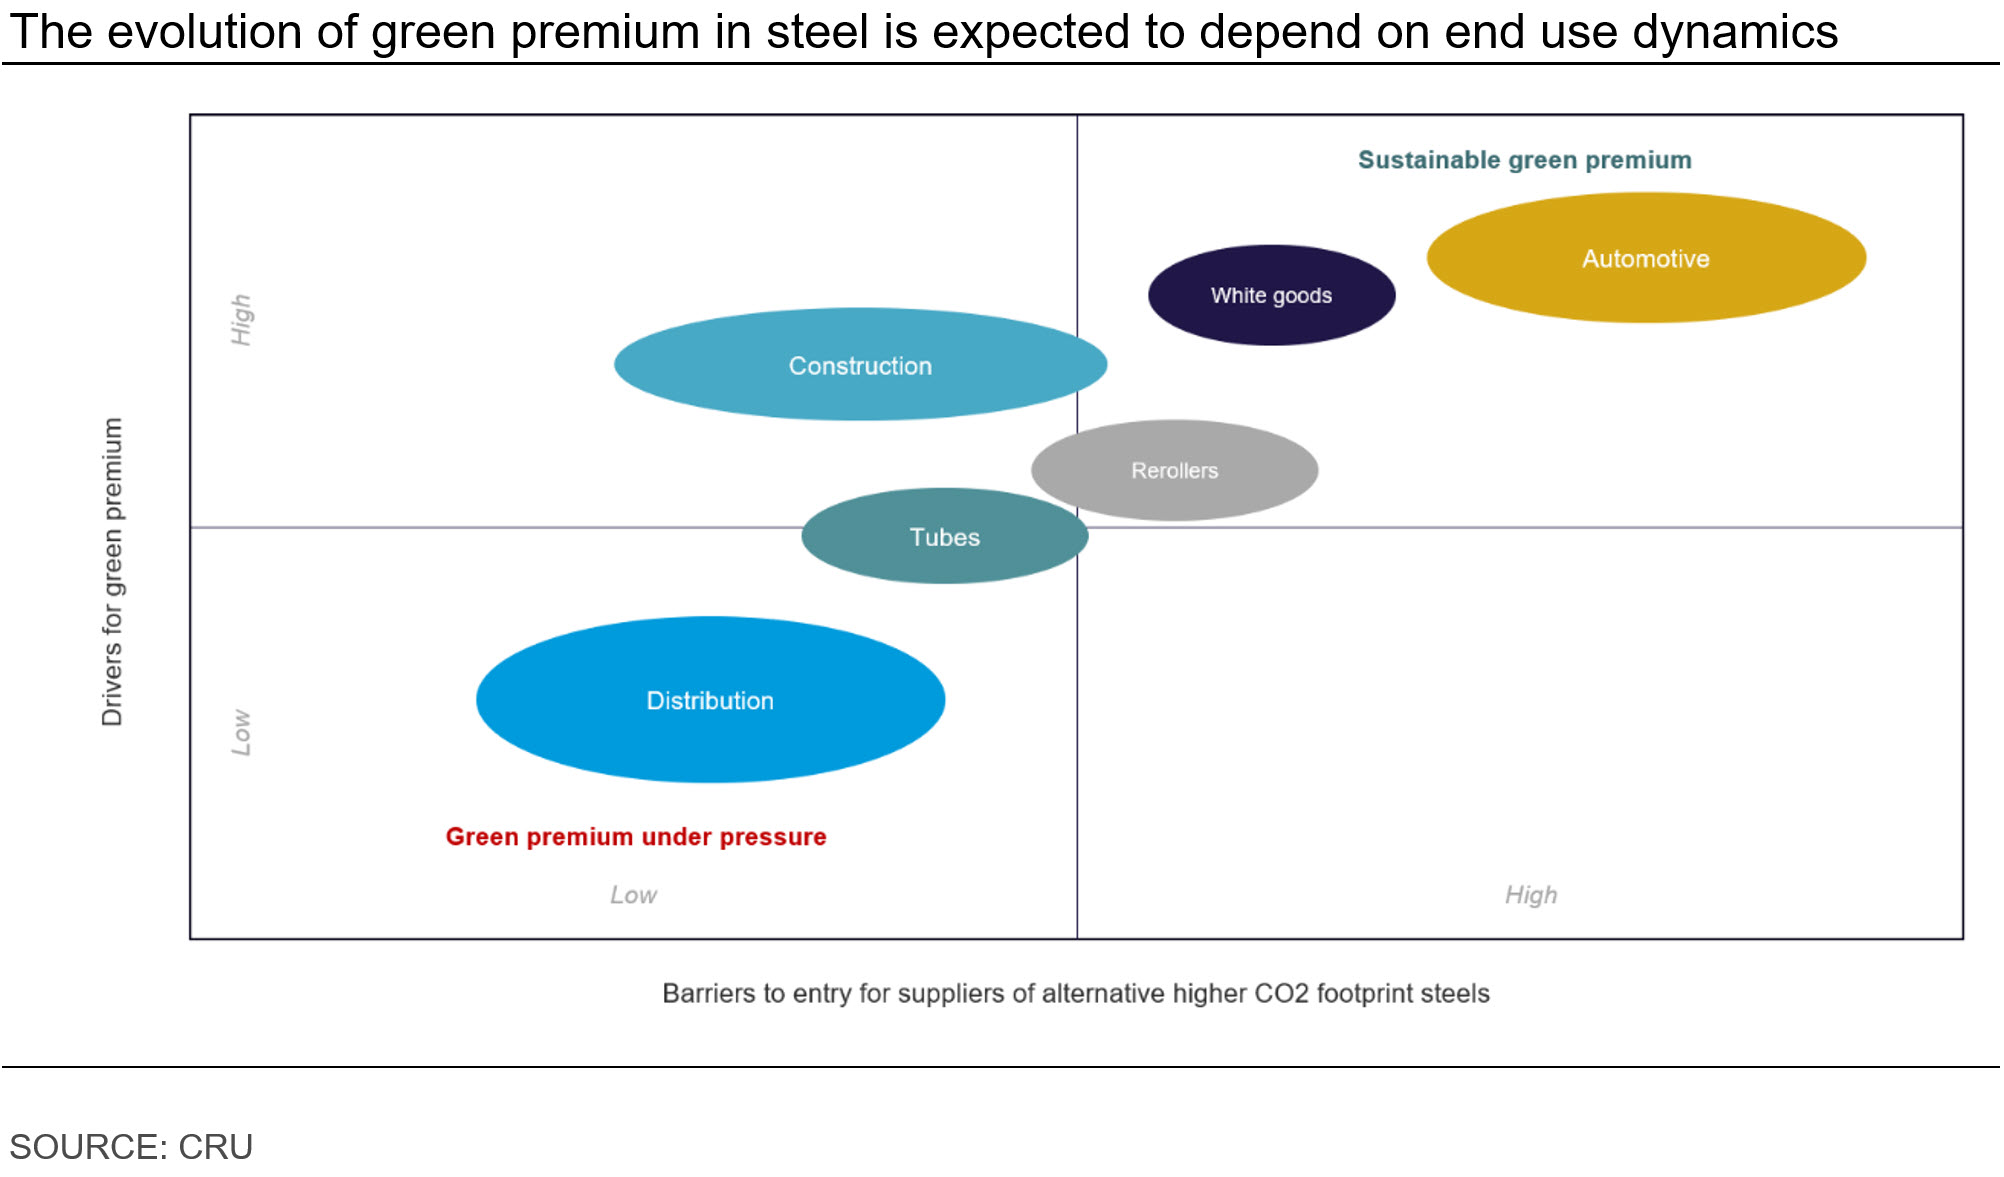 Graph showing that the evolution of green premium in steel is expected to depend on end use dynamics